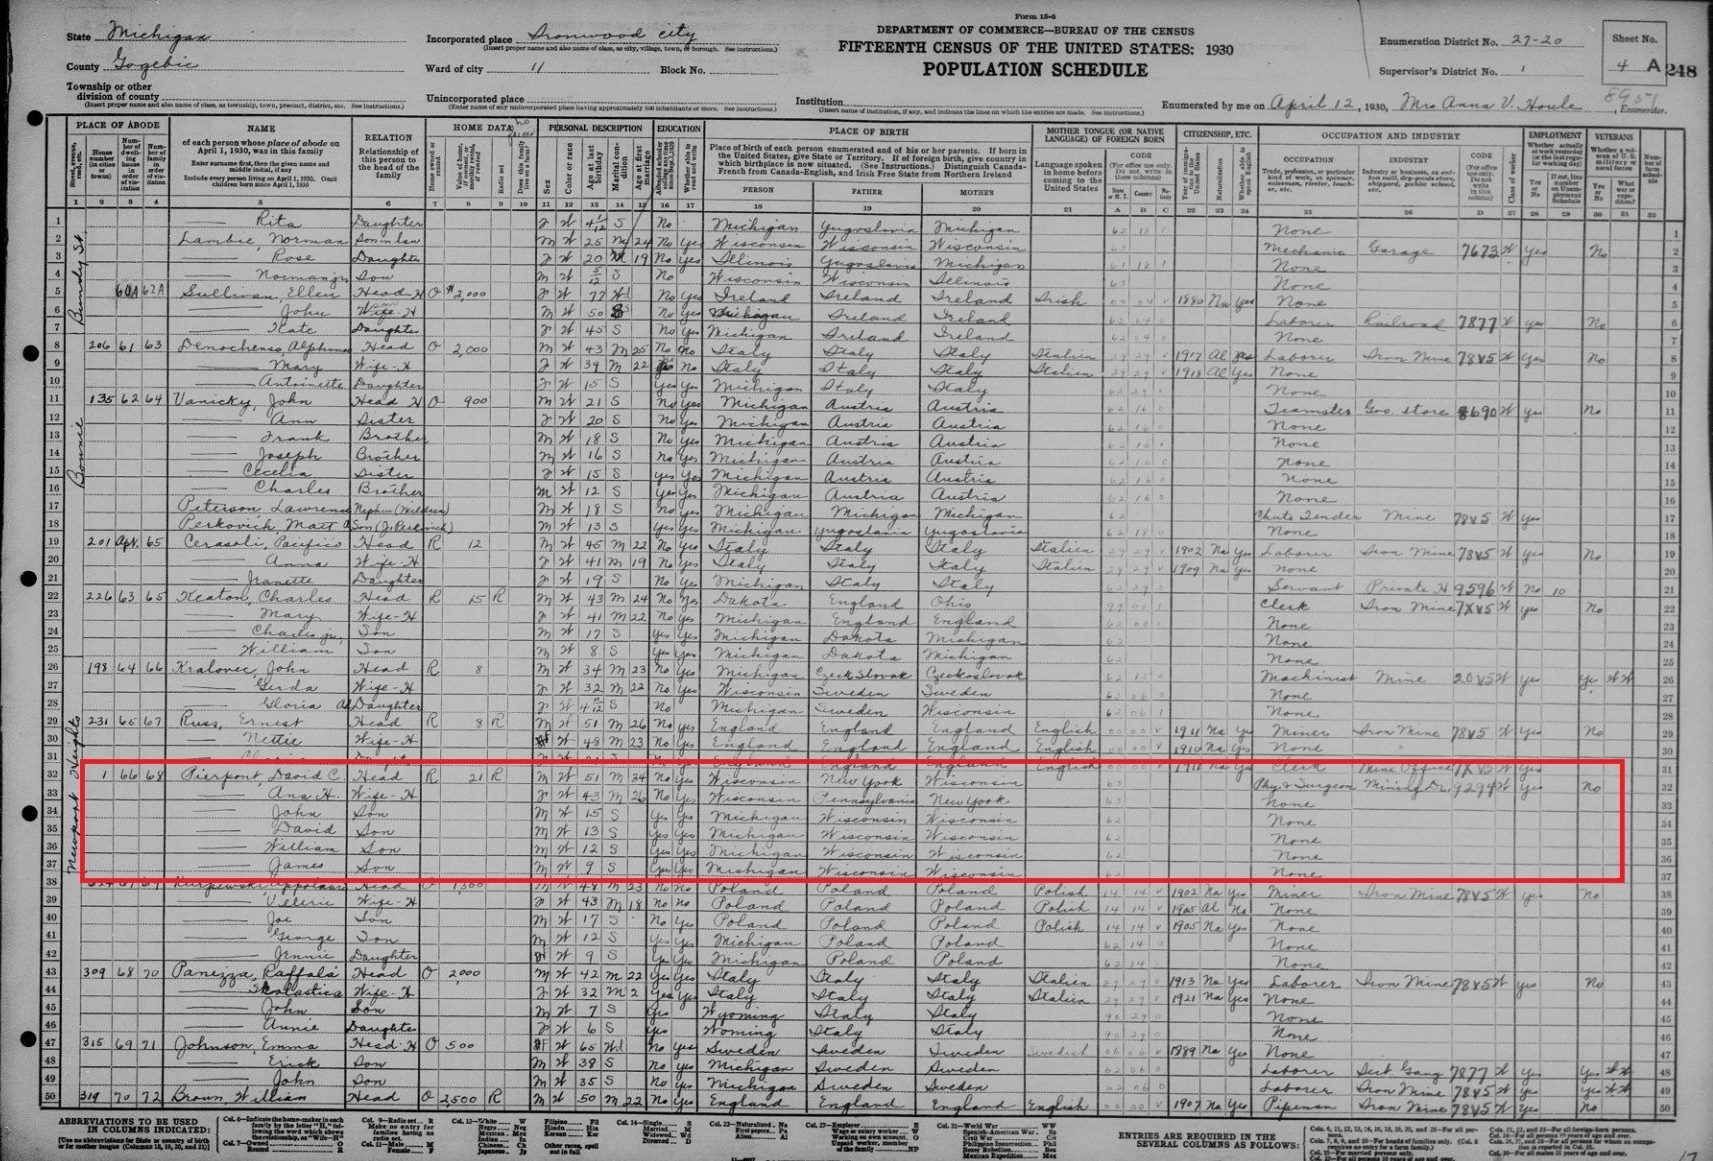 1930 Census Record of Dr. David Cowee Pierpont [Credit: MyHeritage]